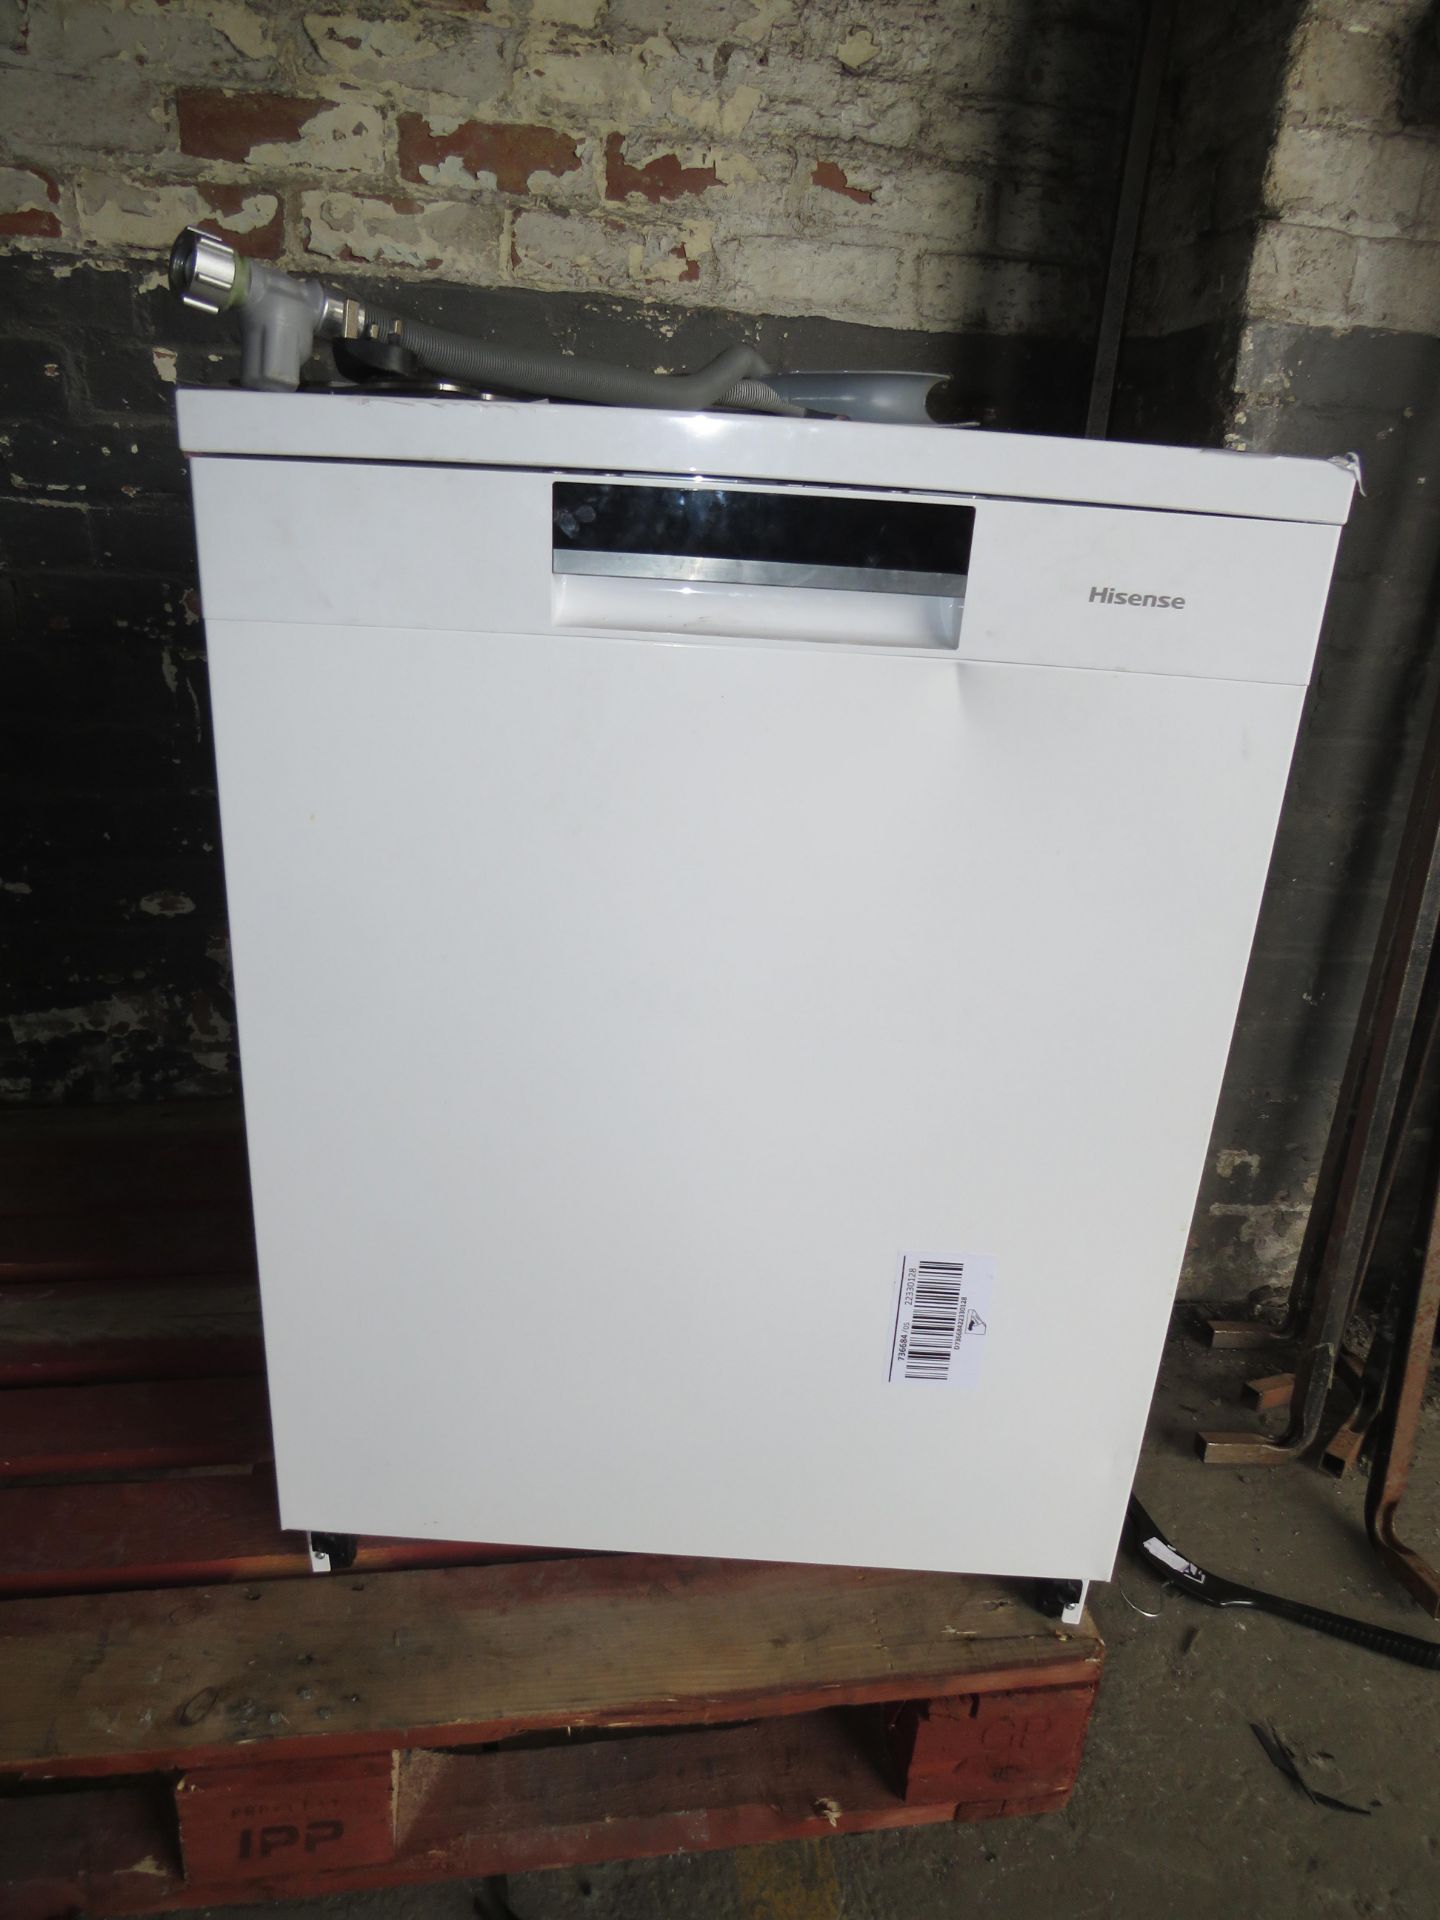 Hisense - White Dishwasher - Item doesn?t power on when oplugged in